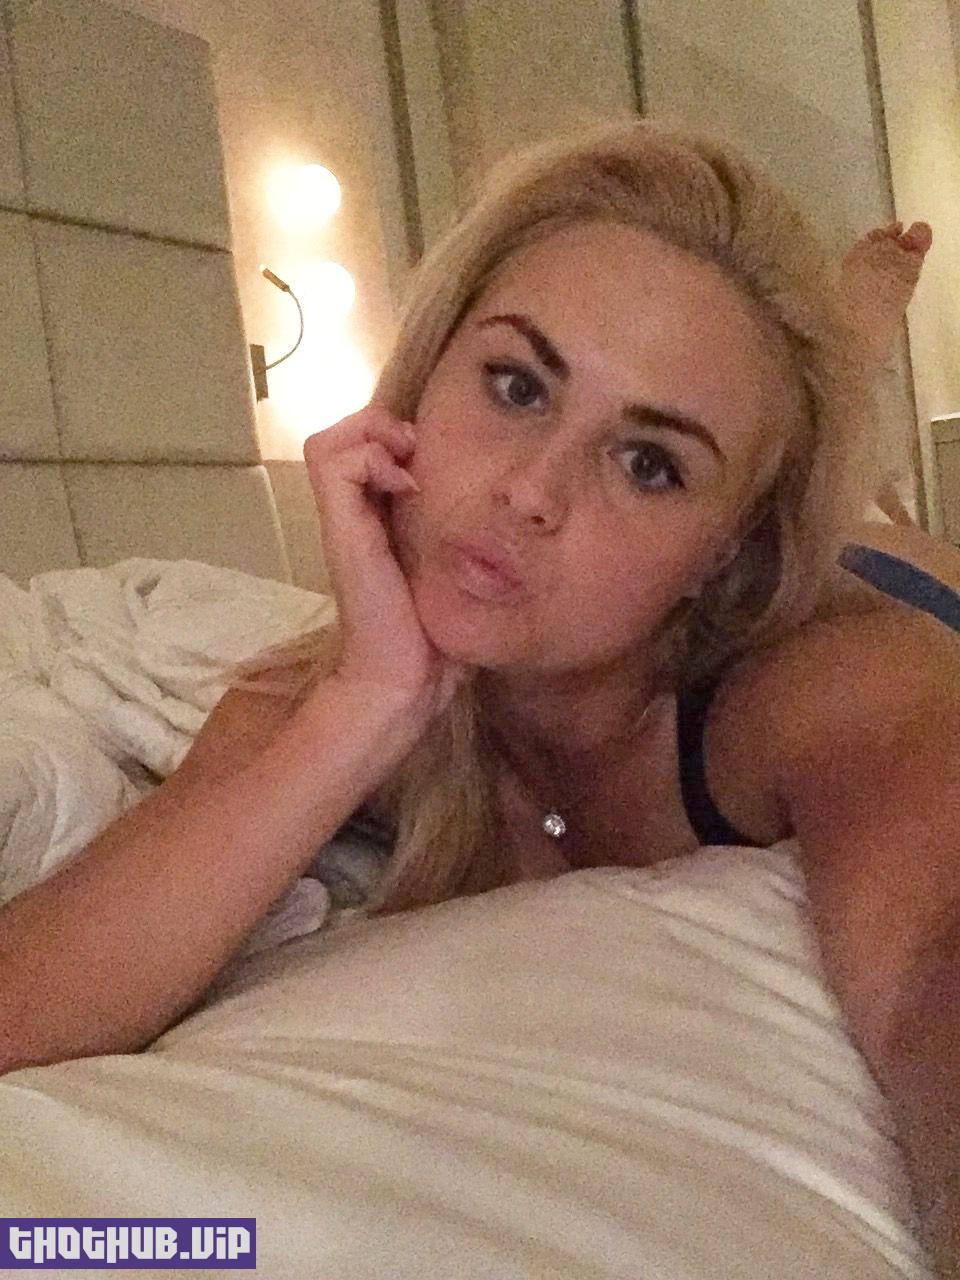 Pro golfer Carly Booth nude leaked selfies The Fappening 2017